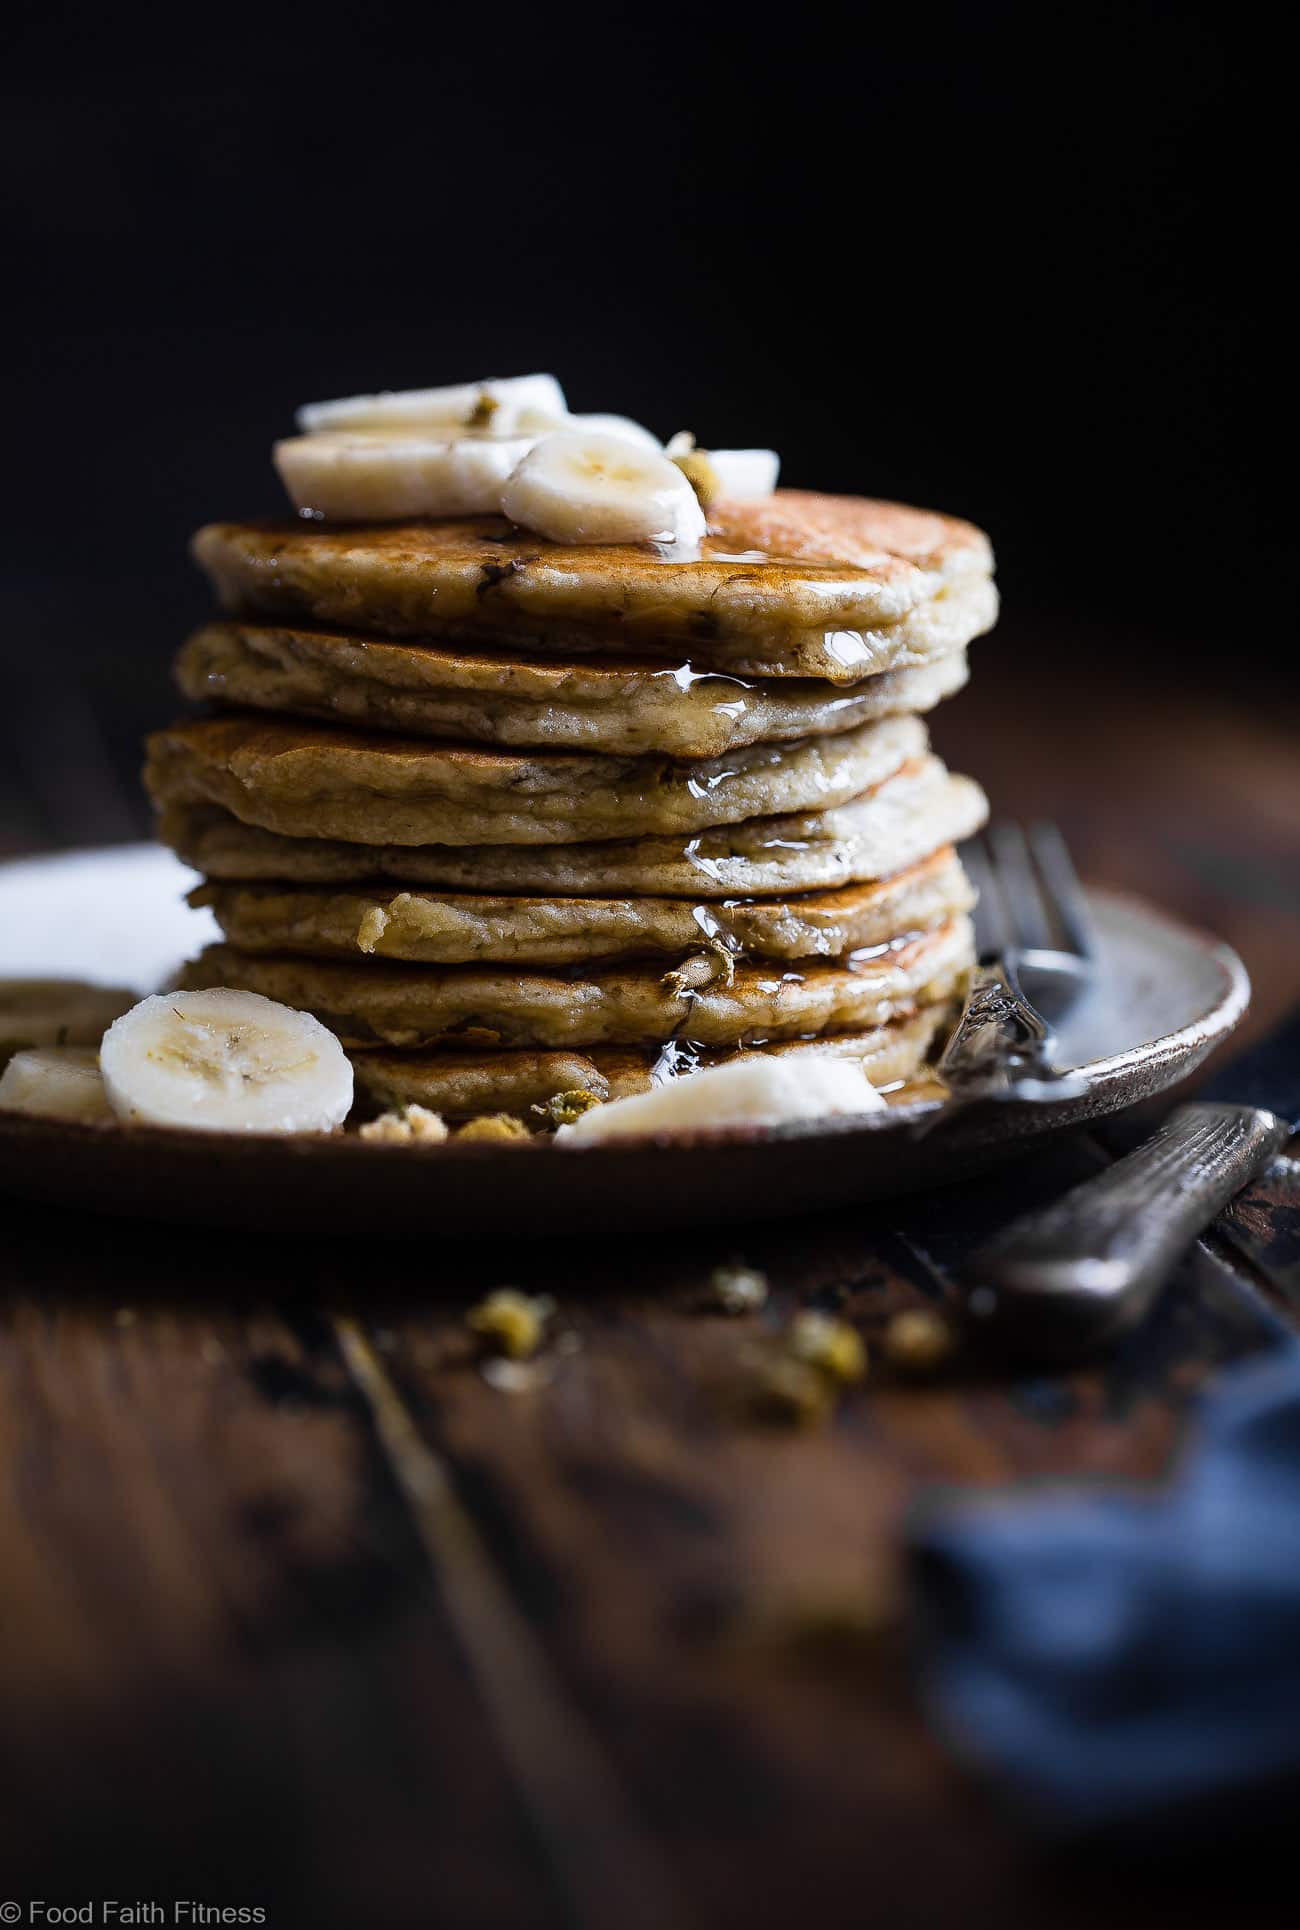 Easy Paleo Banana Pancakes - These quick and easy banana pancakes are naturally sweetened, gluten, grain and dairy free and SO light and fluffy! The perfect healthy start to your day or weekend breakfast! | Foodfaithfitness.com | @FoodFaithFit